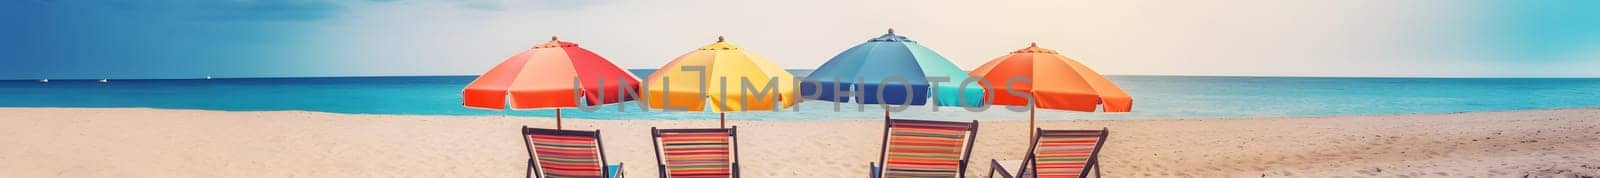 Beach umbrellas with chairs on the sand beach - summer vacation theme header. Neural network generated in May 2023. Not based on any actual person, scene or pattern.